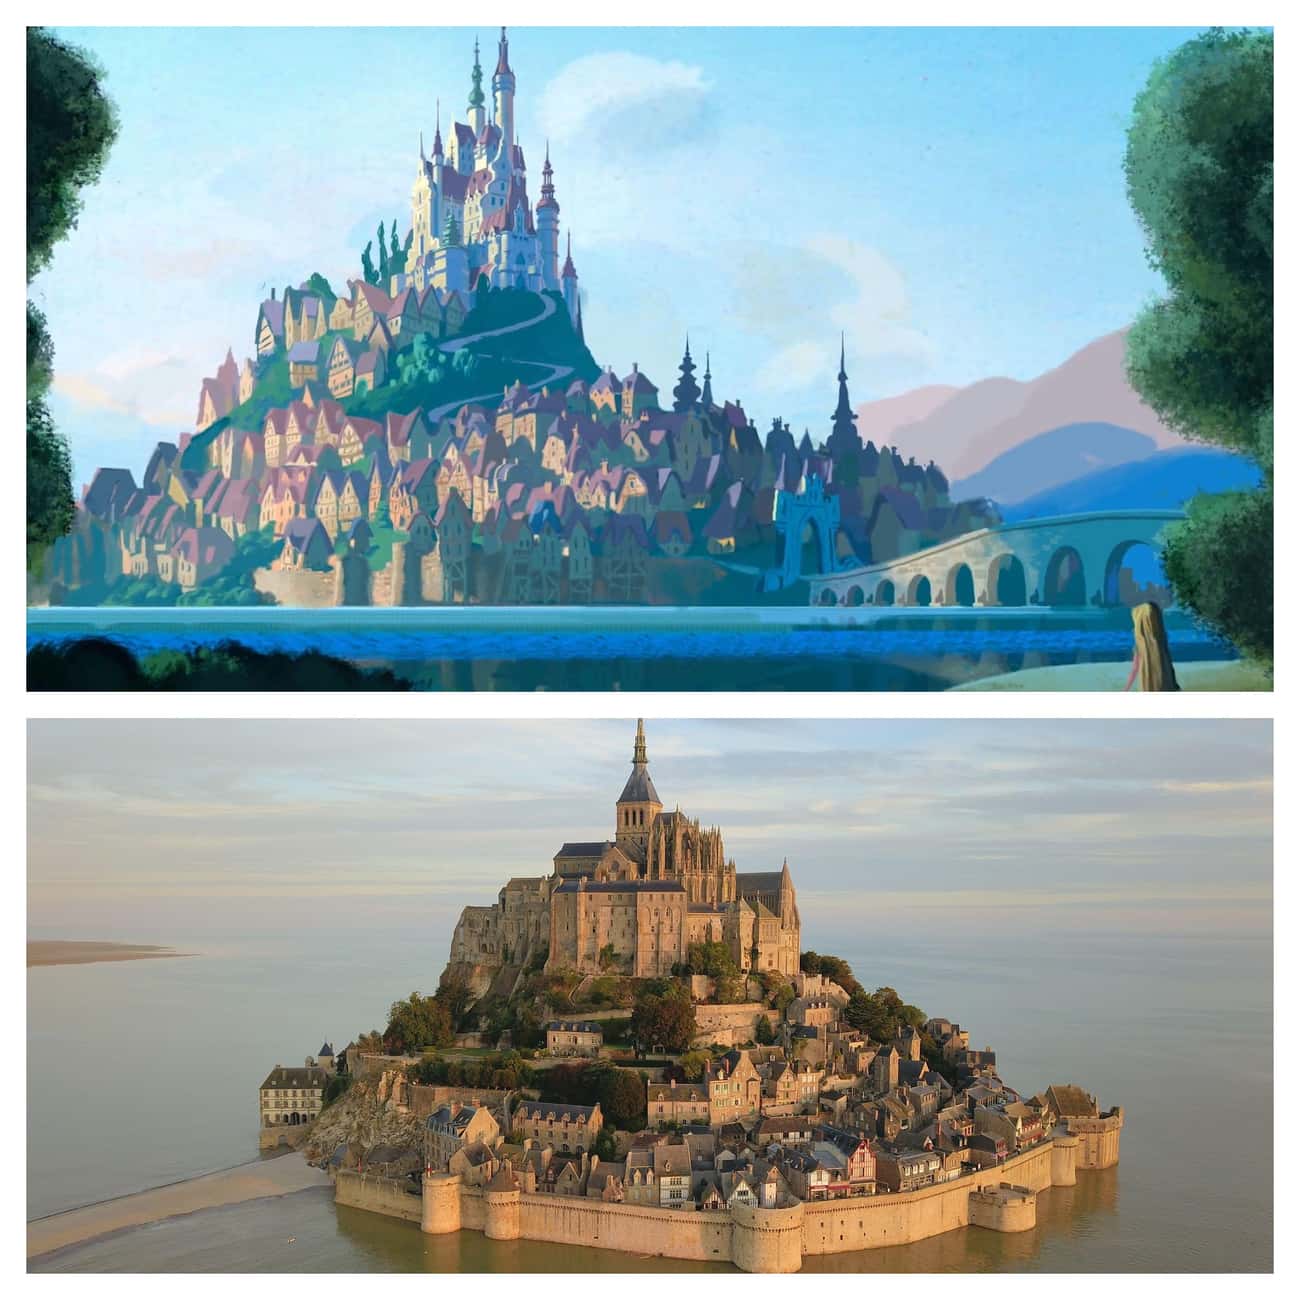 Island Kingdom In 'Tangled' Was Inspired By Mont-Saint-Michel